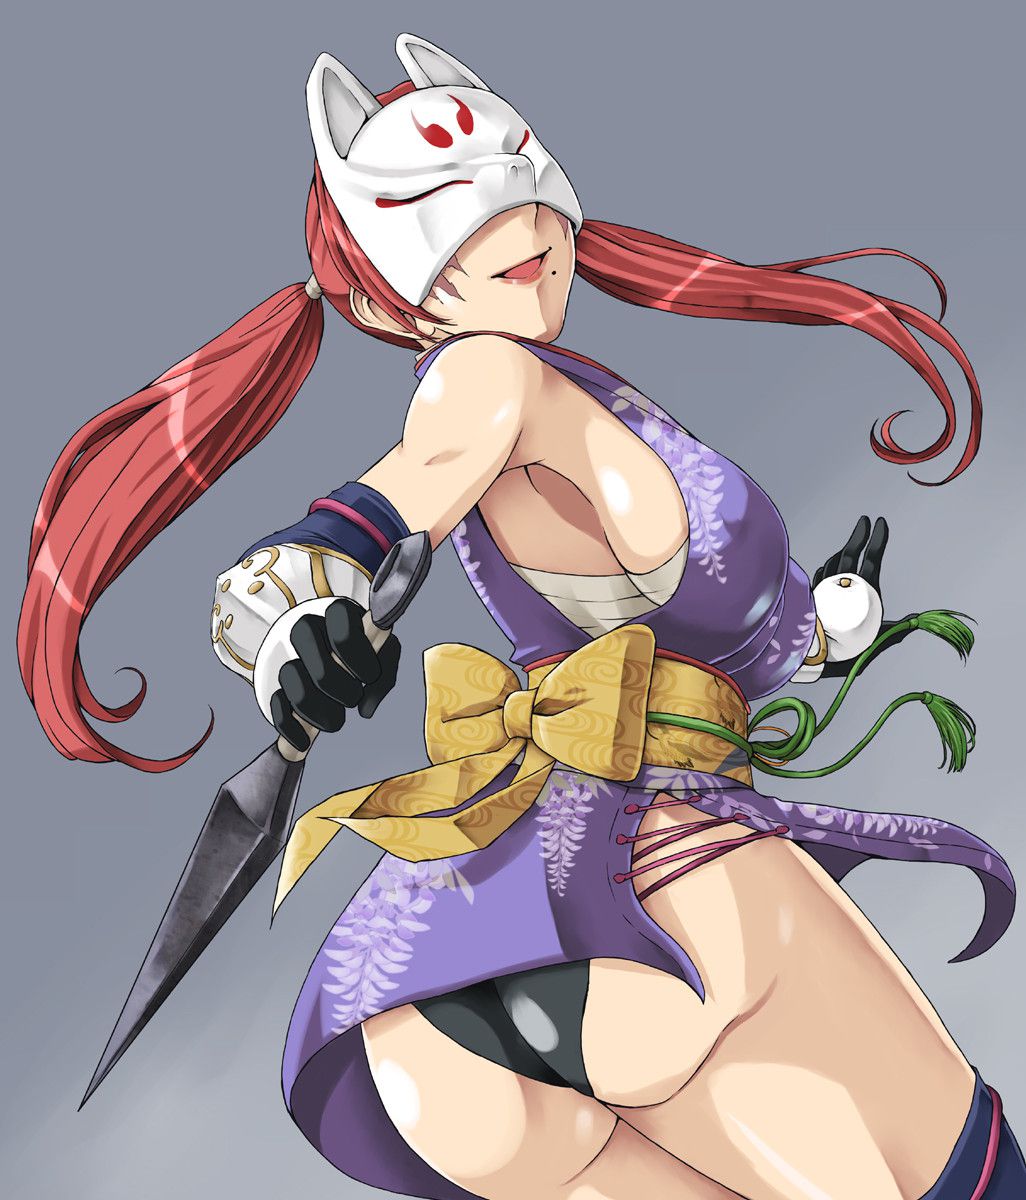 The second erotic image of a woman ninja who seems to be good at flytrap 12